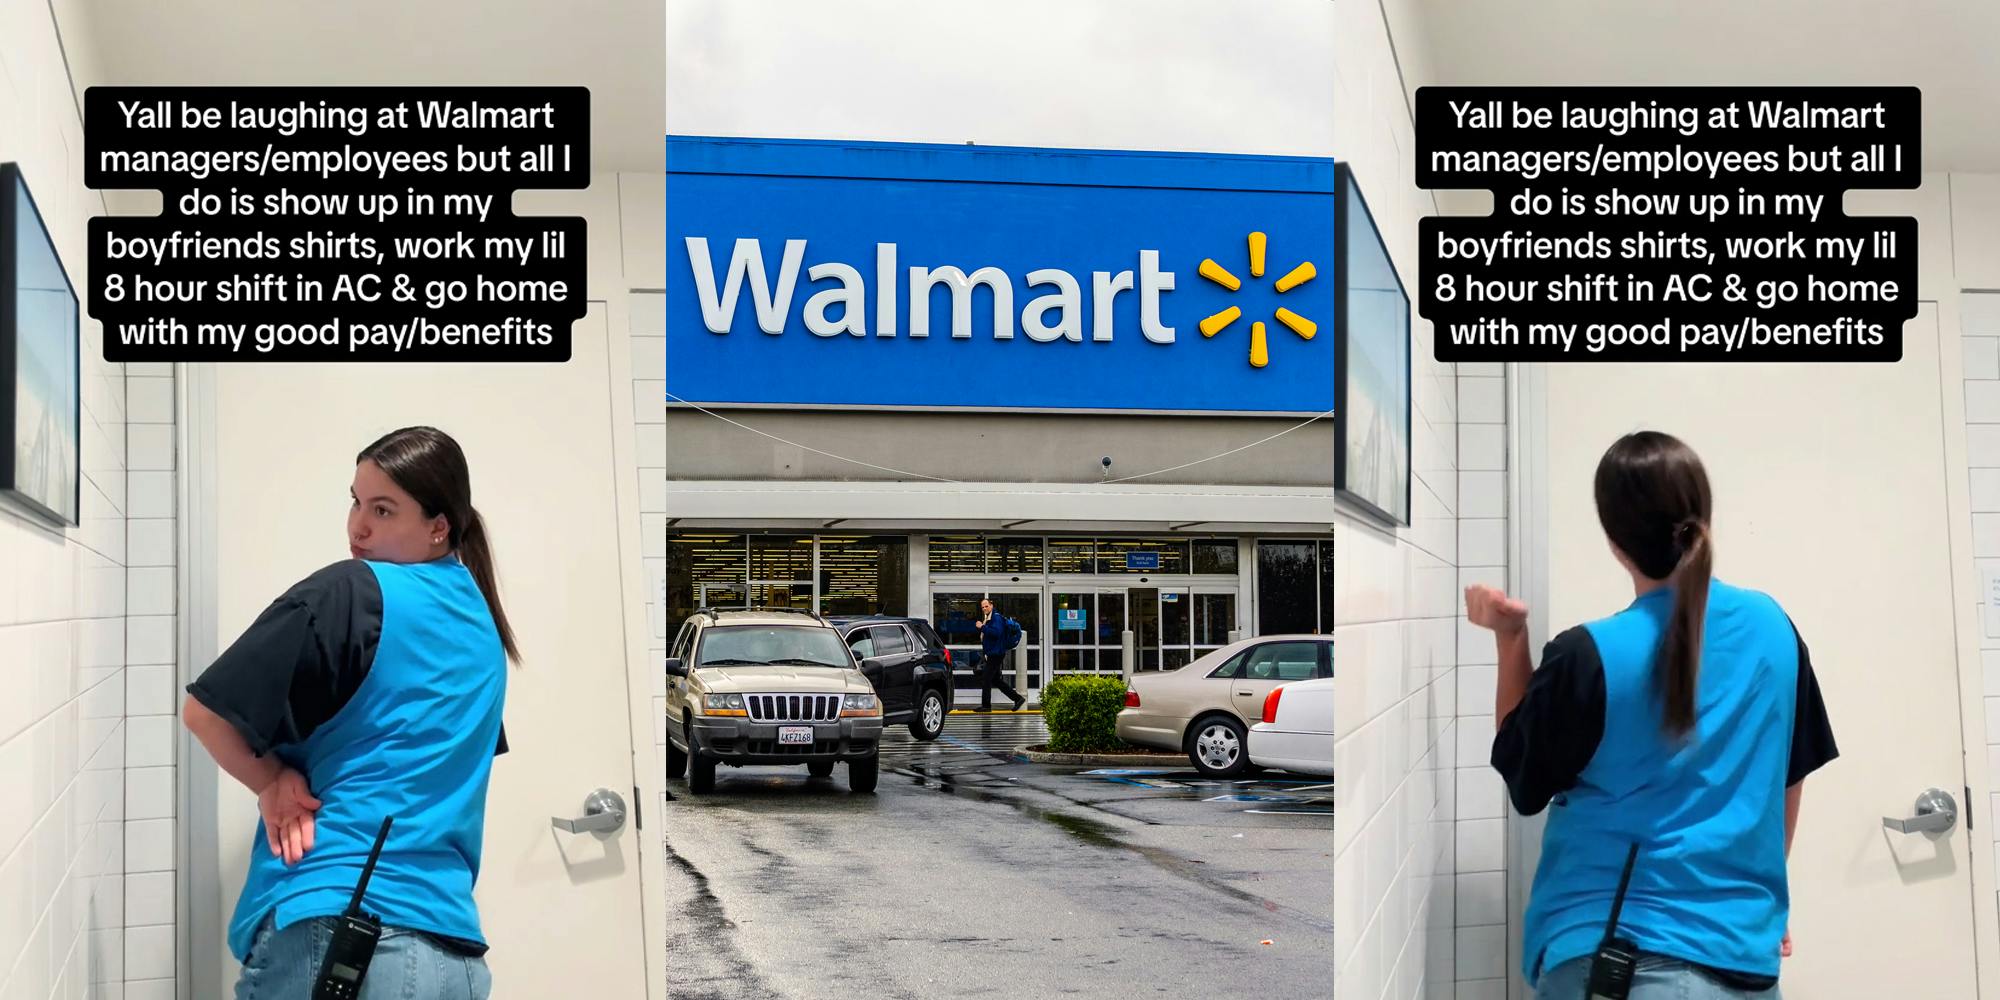 Walmart employee dancing with caption "Y'all be laughing at Walmart managers/employees but all I do is show up in my boyfriends shirts, work my lil 8 hour shift in AC & go home with my good pay/benefits" (l) Walmart building with sign (c) Walmart employee dancing with caption "Y'all be laughing at Walmart managers/employees but all I do is show up in my boyfriends shirts, work my lil 8 hour shift in AC & go home with my good pay/benefits" (r)